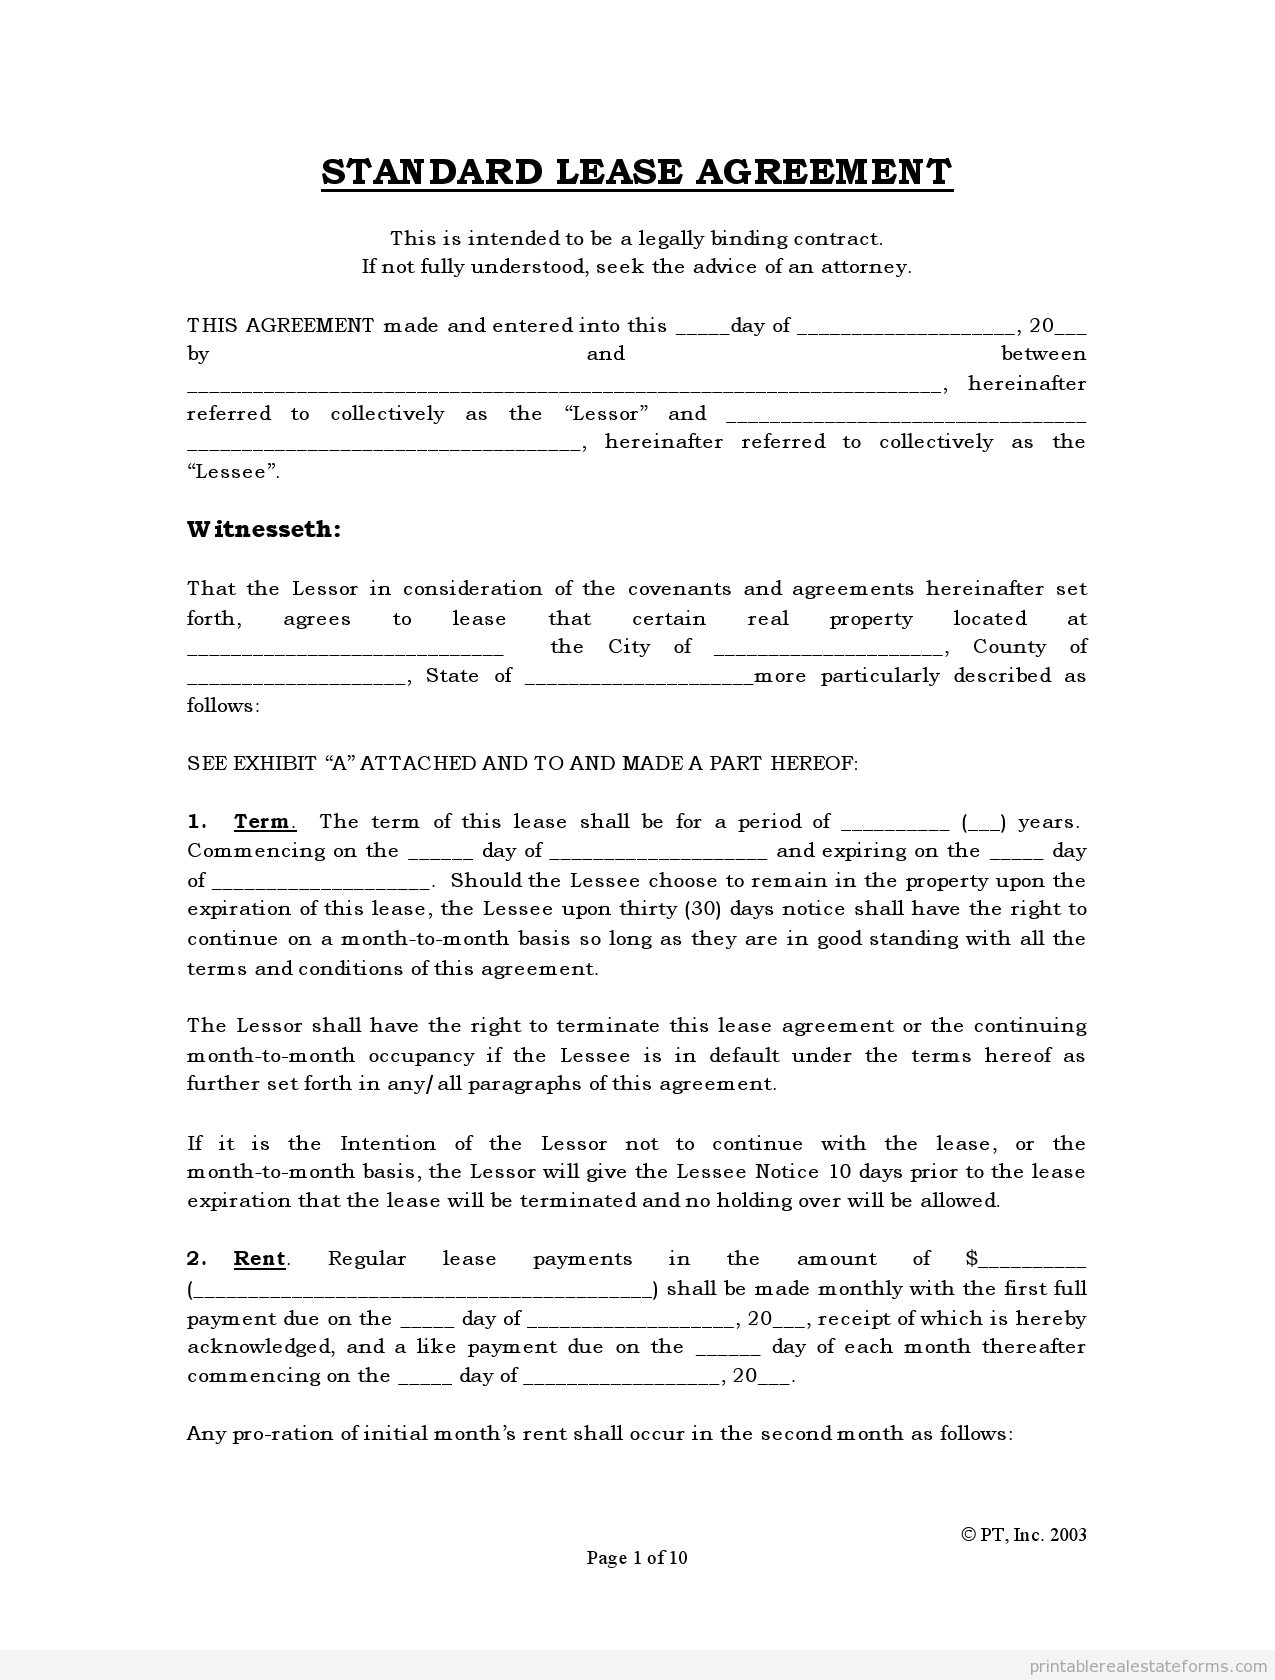 Free Rental Agreements To Print | Free Standard Lease Agreement Form - Free Printable Room Rental Agreement Forms